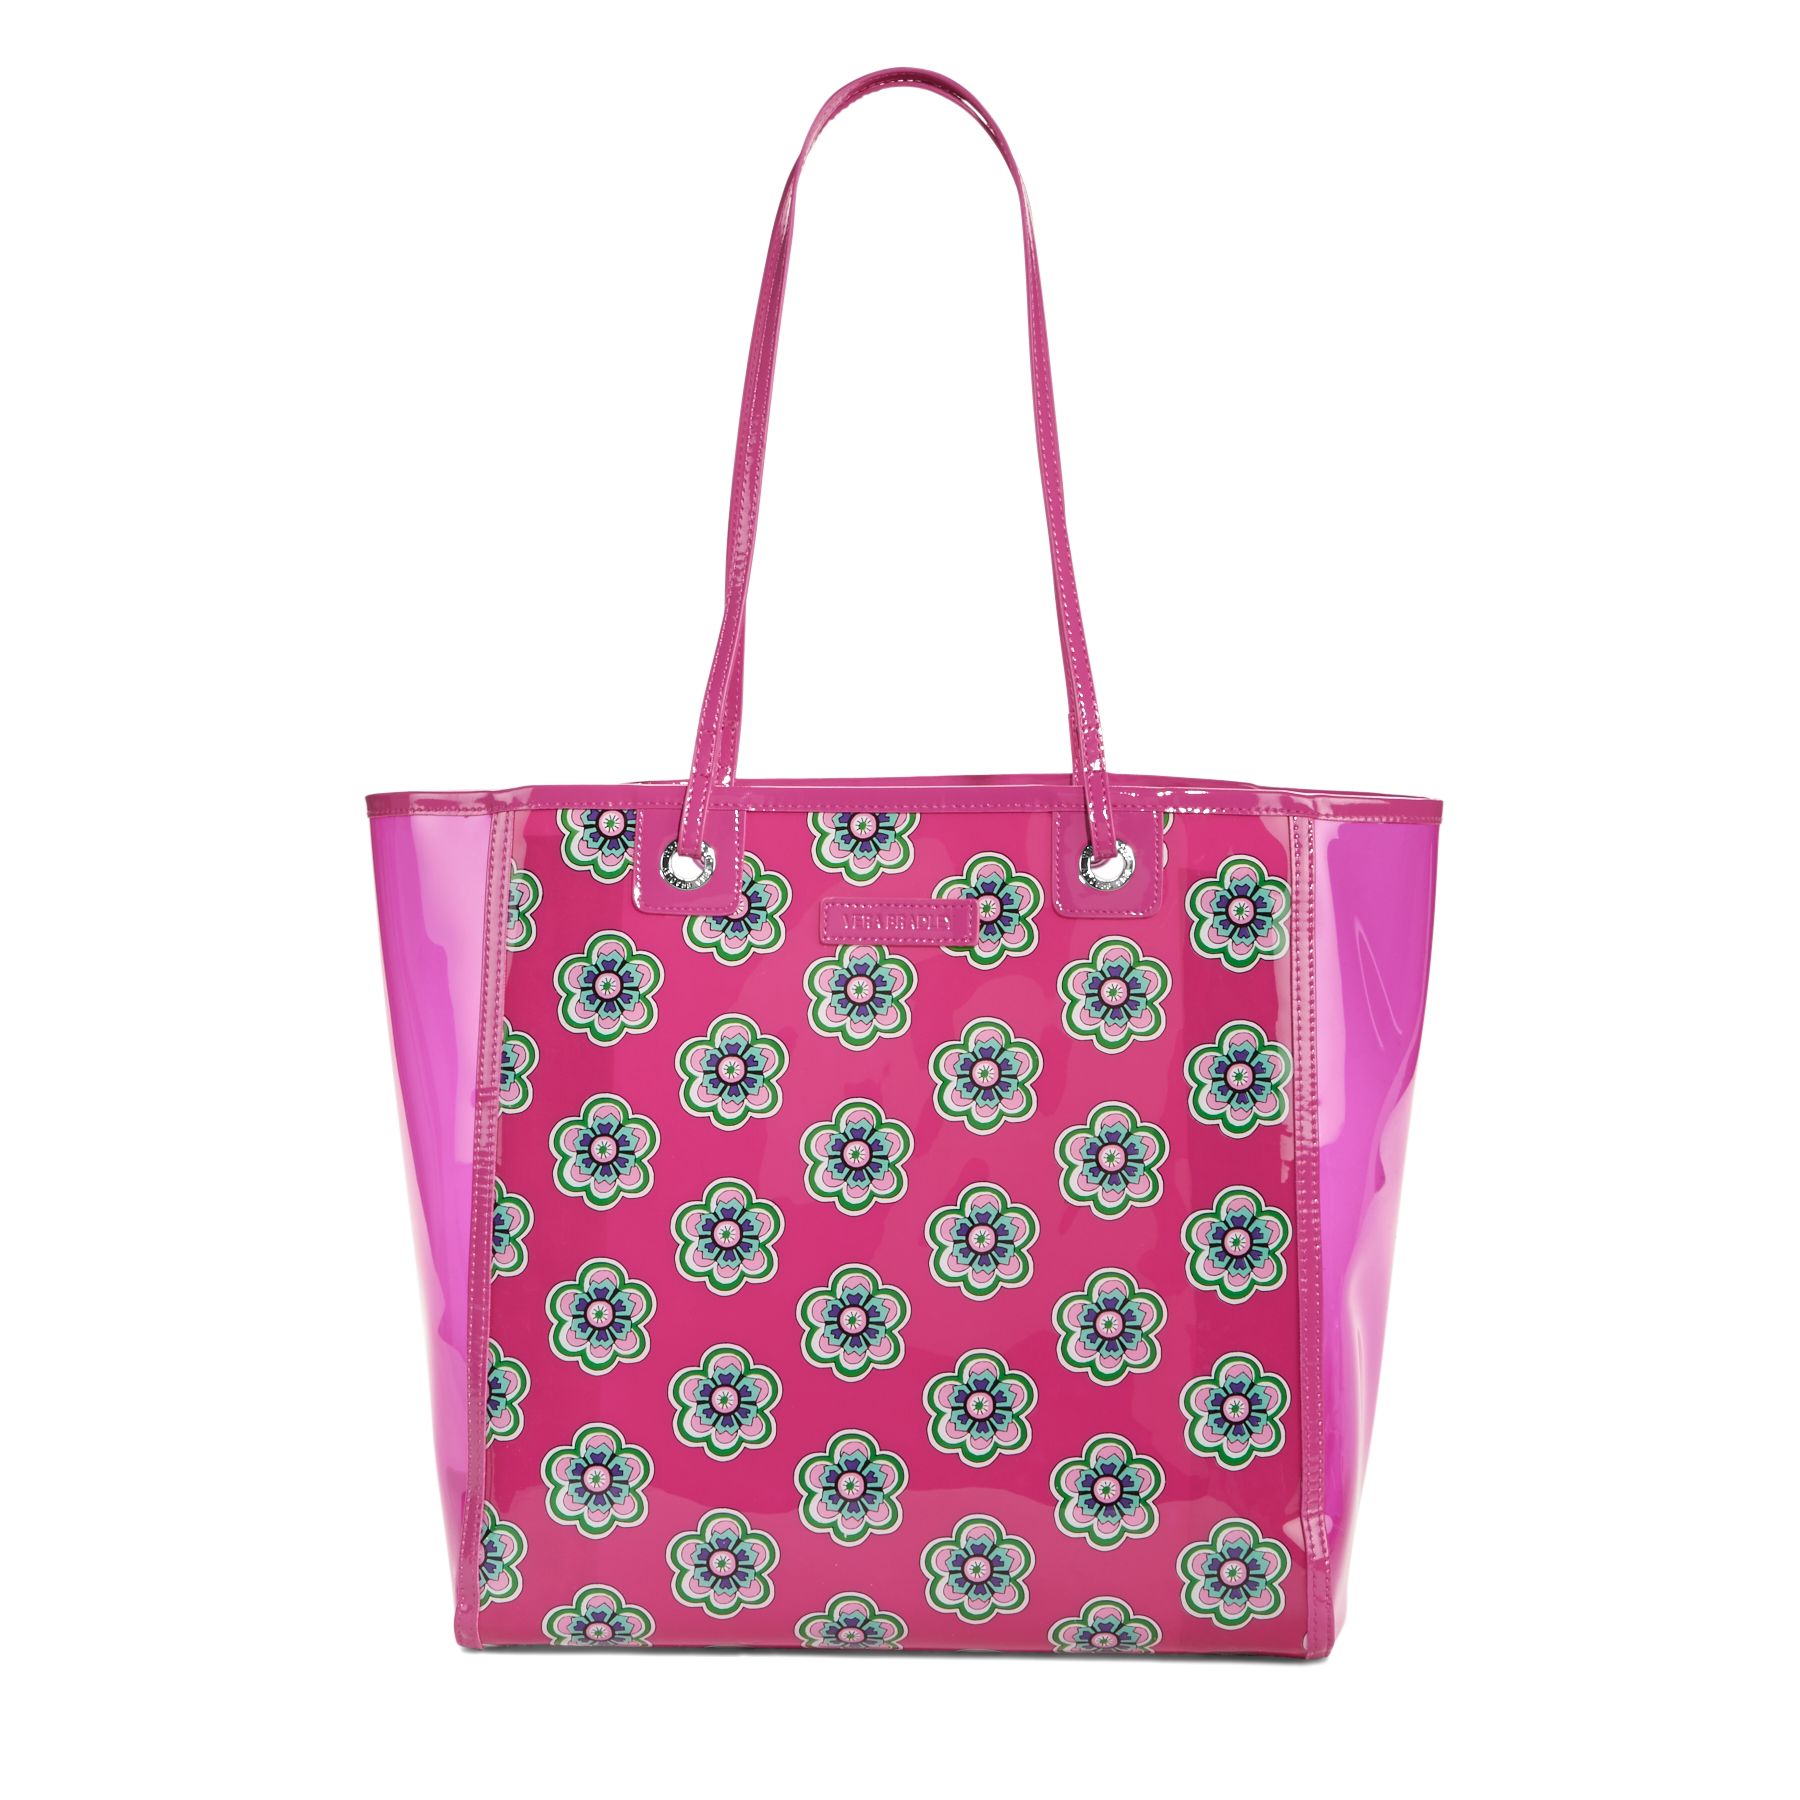 Vera Bradley Clearly Colorful Beach Tote Bag